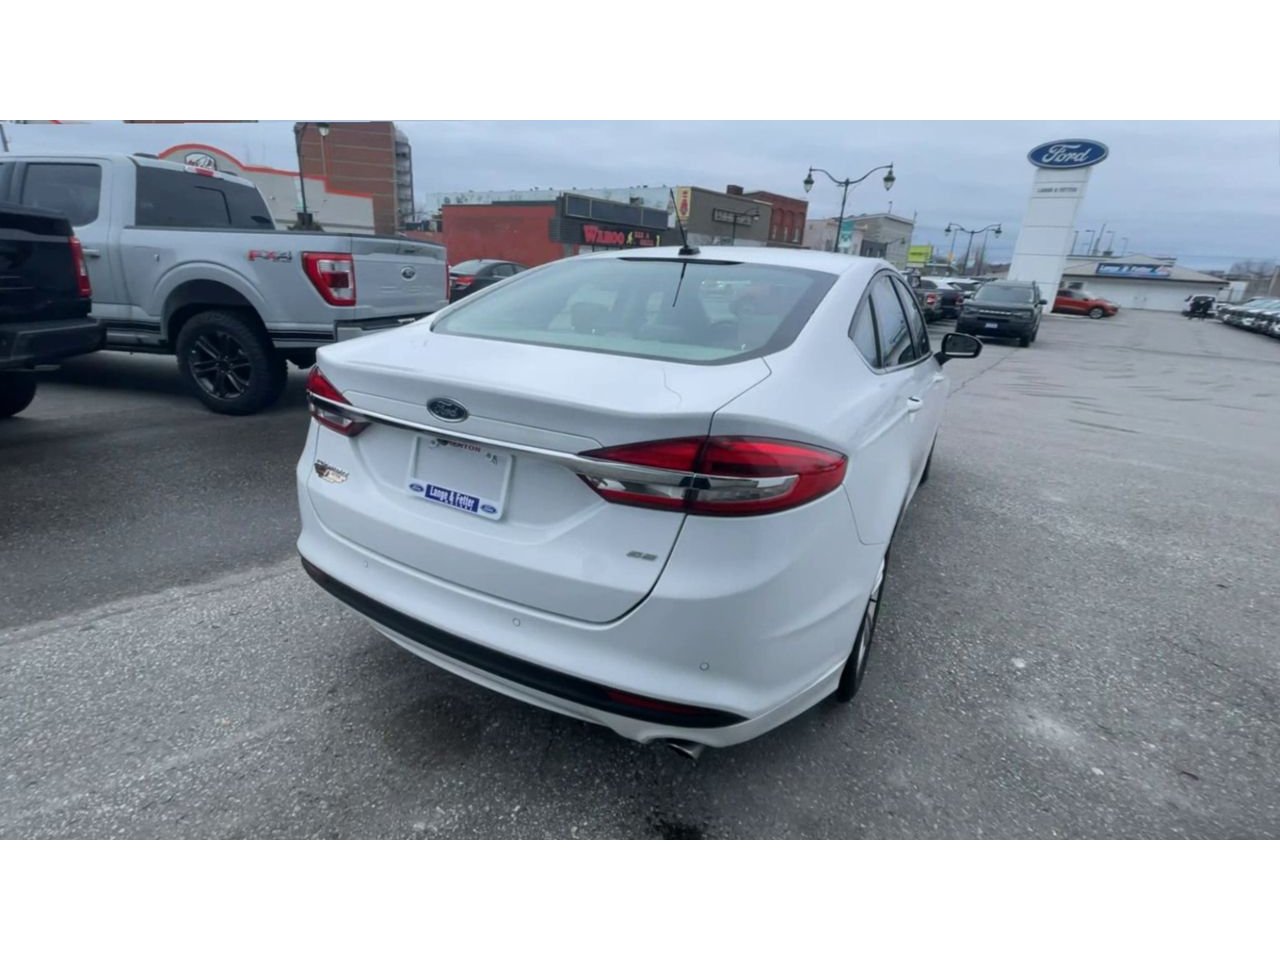 2018 Ford Fusion - P21087 Full Image 8